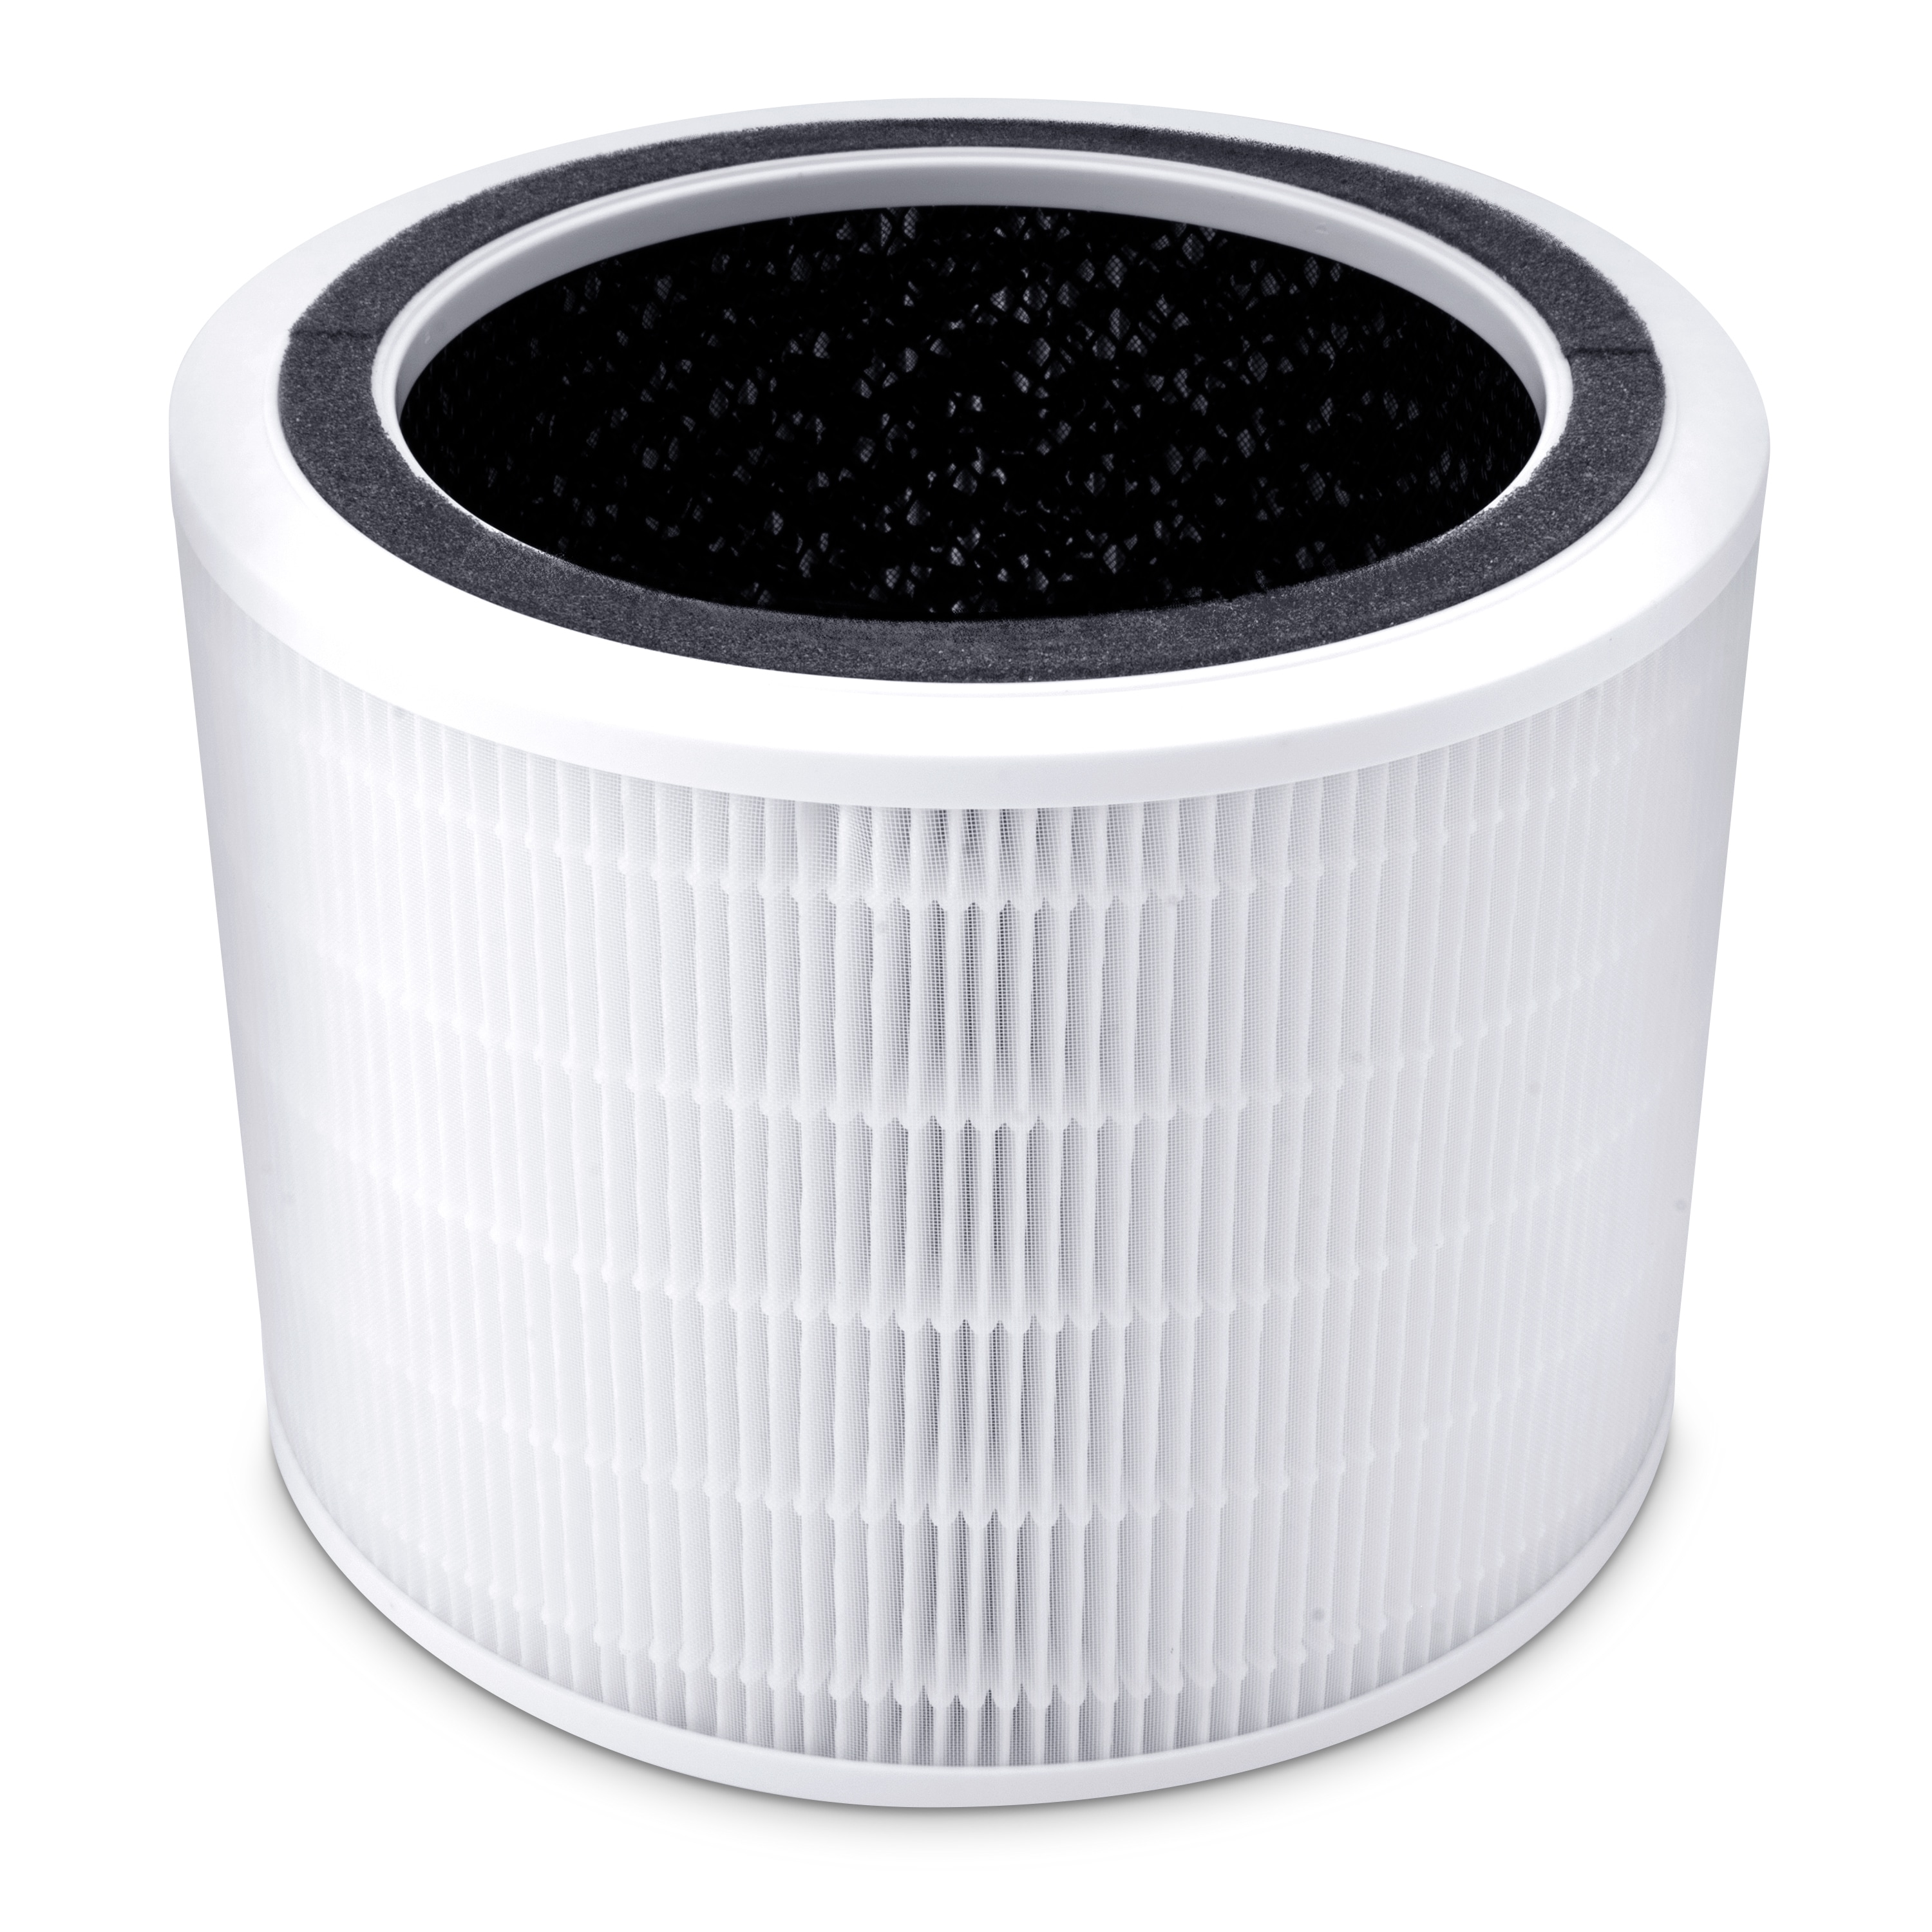  Dttery 2 Set LV-H132 Air Purifier Replacement Filter, True HEPA  Filter, LV-H132-RF, Compatible with Levoit LV-H132 Air Purifier : Home &  Kitchen